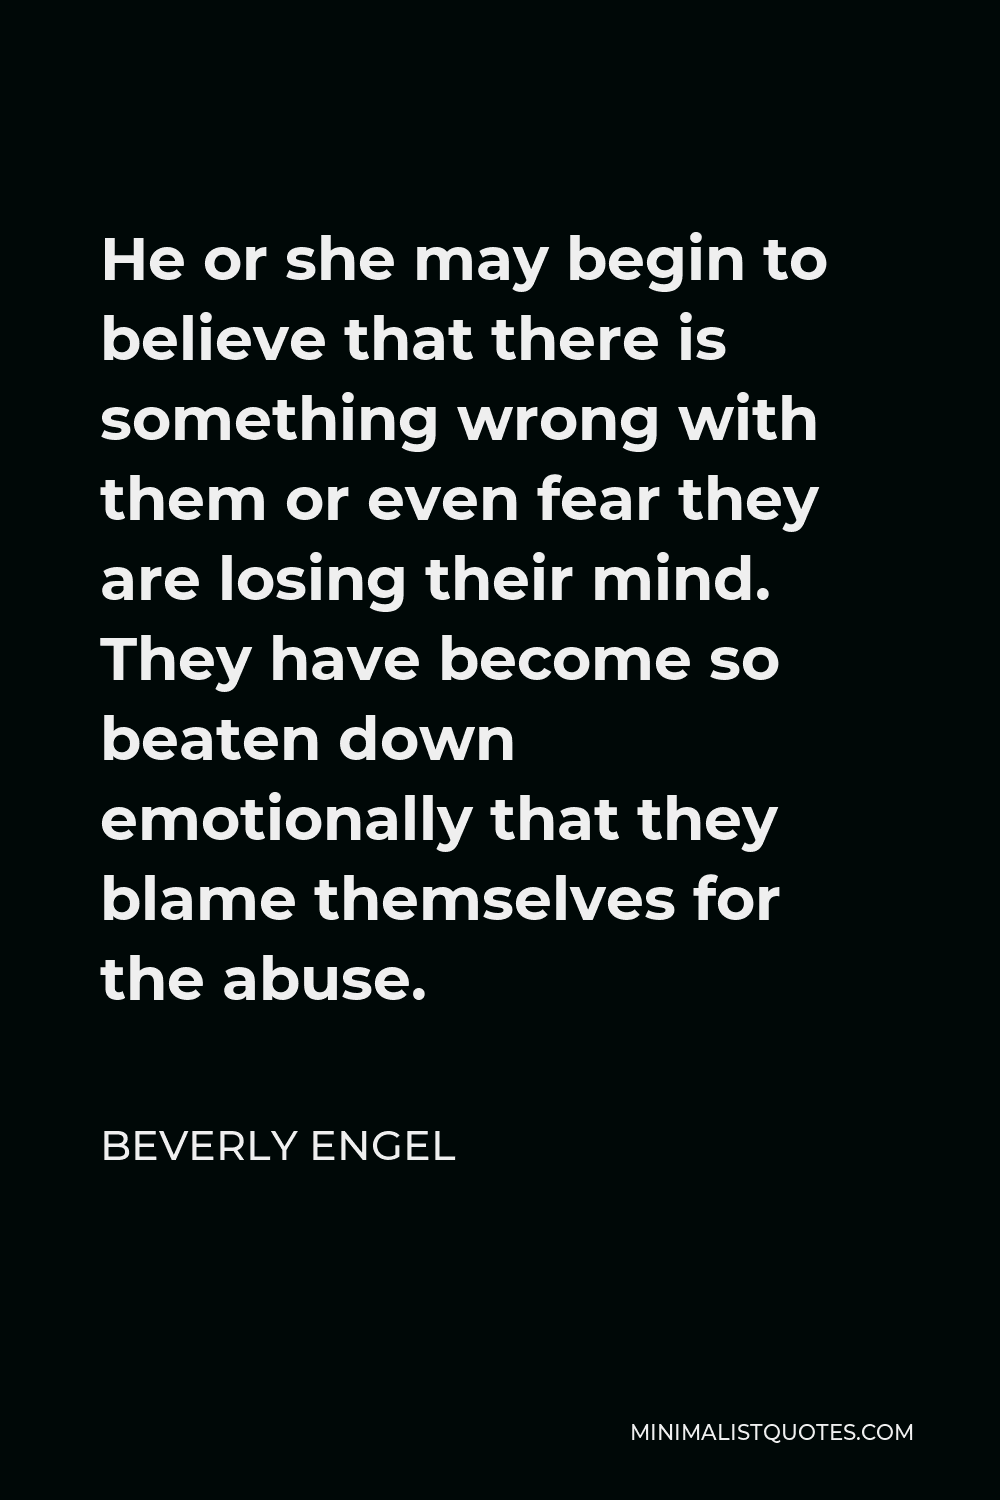 Beverly Engel Quote - He or she may begin to believe that there is something wrong with them or even fear they are losing their mind. They have become so beaten down emotionally that they blame themselves for the abuse.